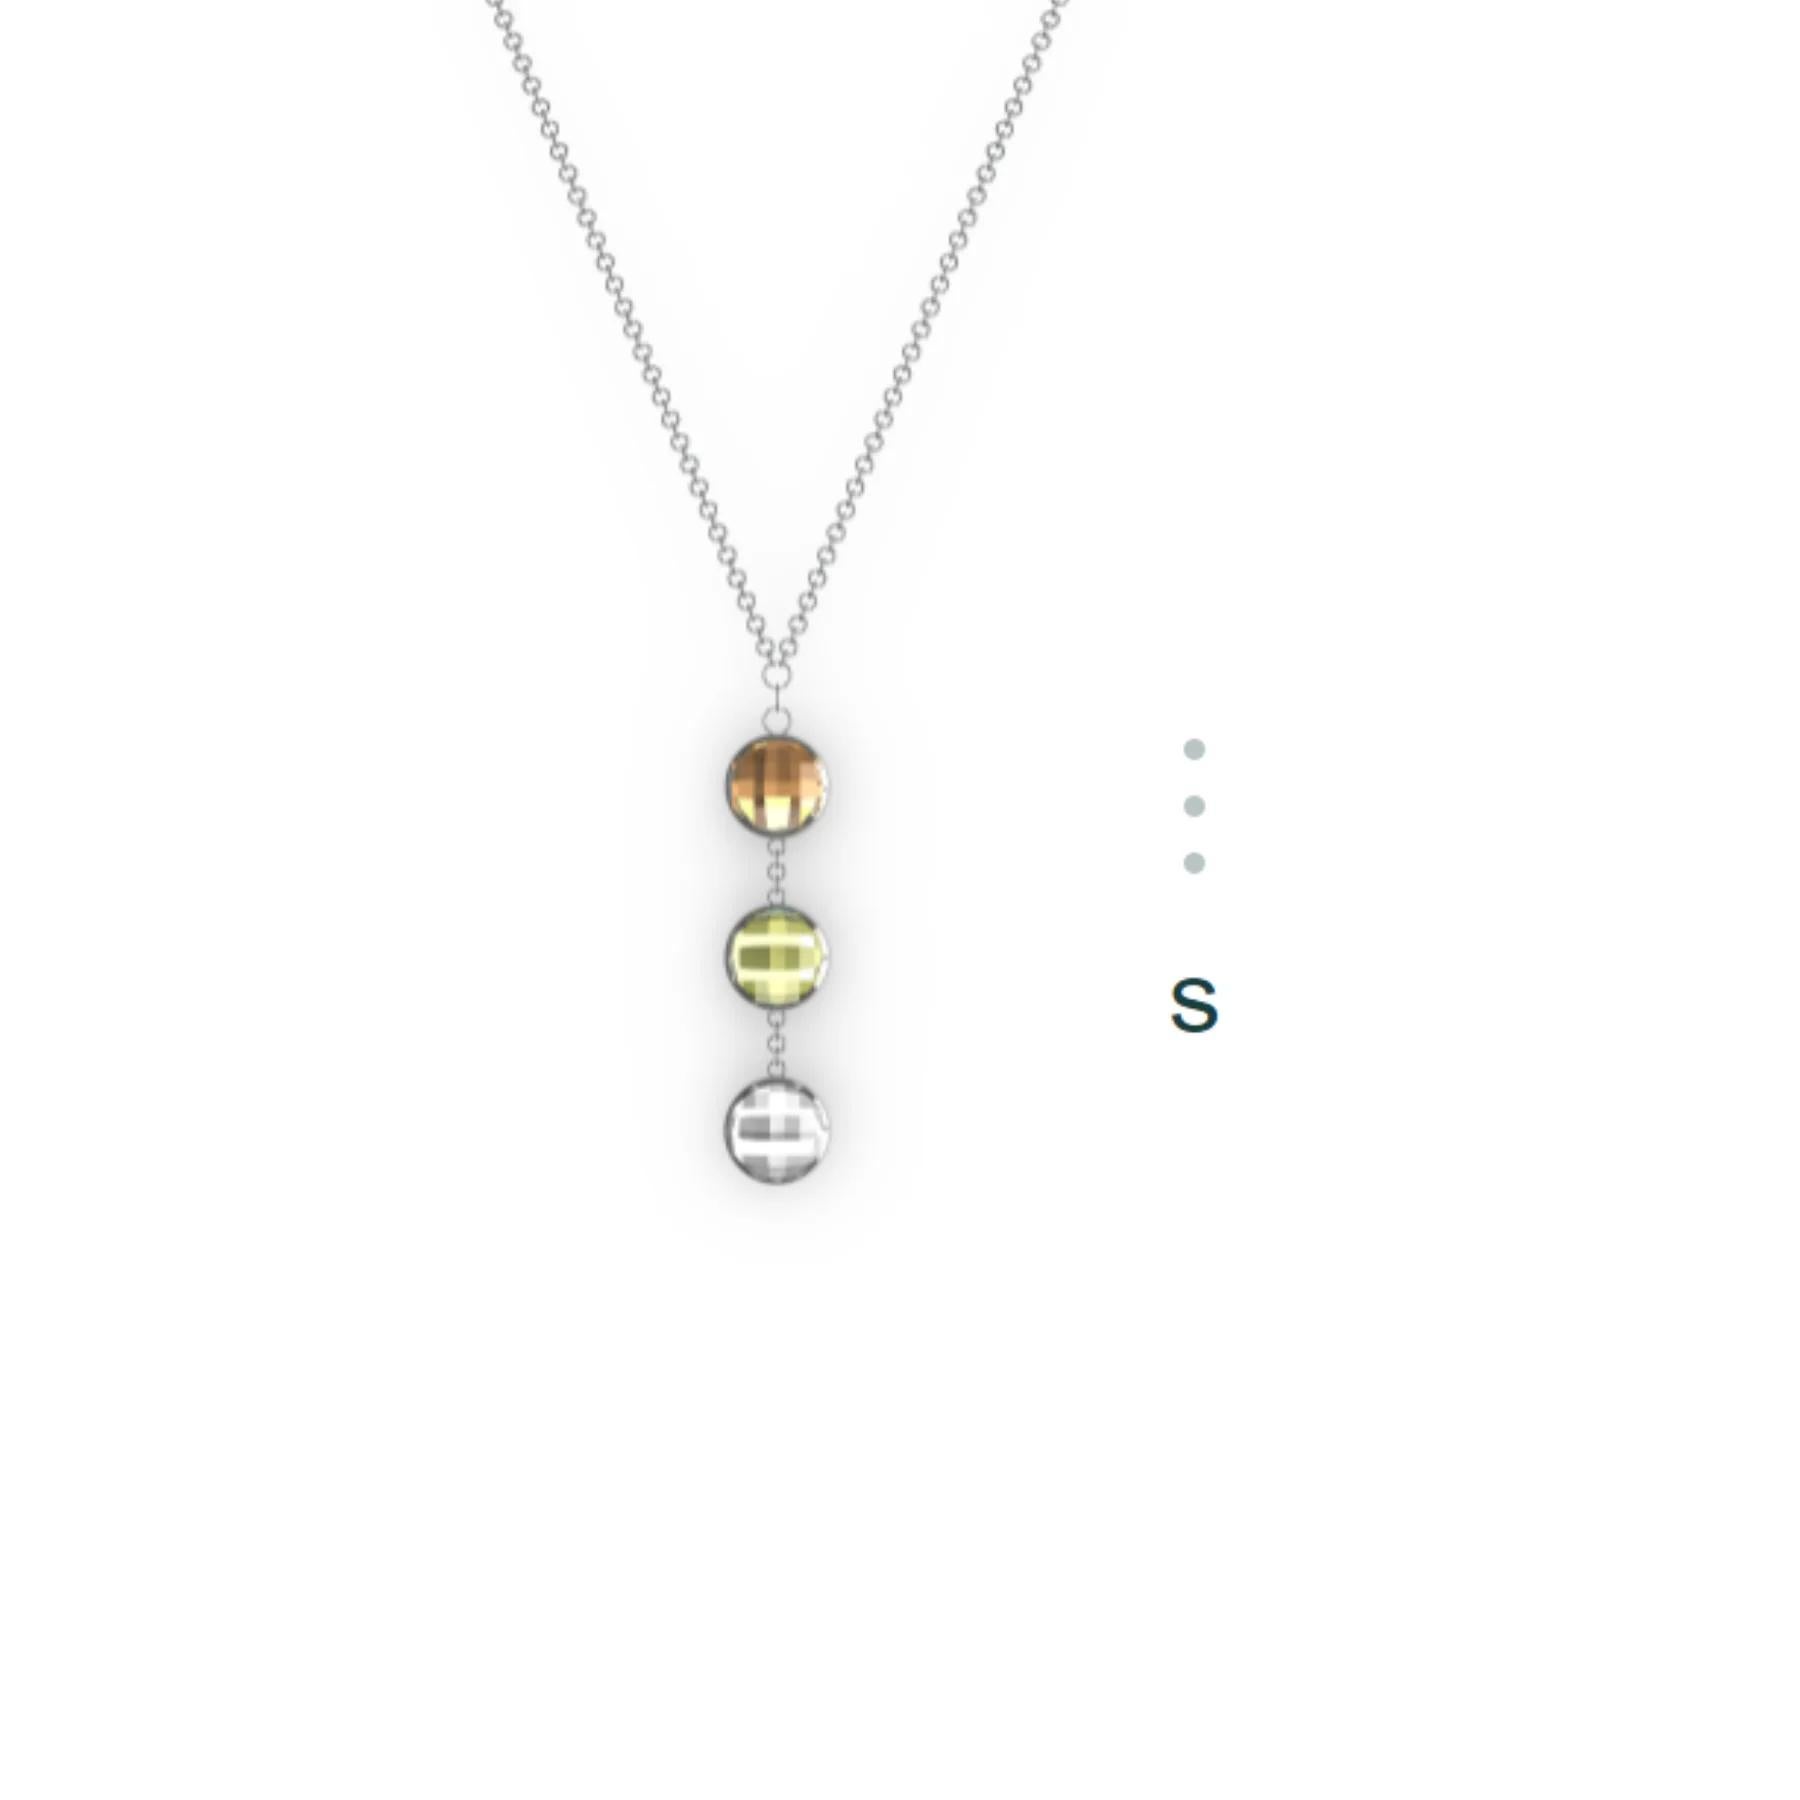 S is for Smile, Simplicity, Sincerity… Encode the letters of your name, your children's initials, your lucky numbers, or a secret message of inspiration.

Details of this piece:
Handcrafted
Recycled 925 sterling silver

About Us
In the intricate